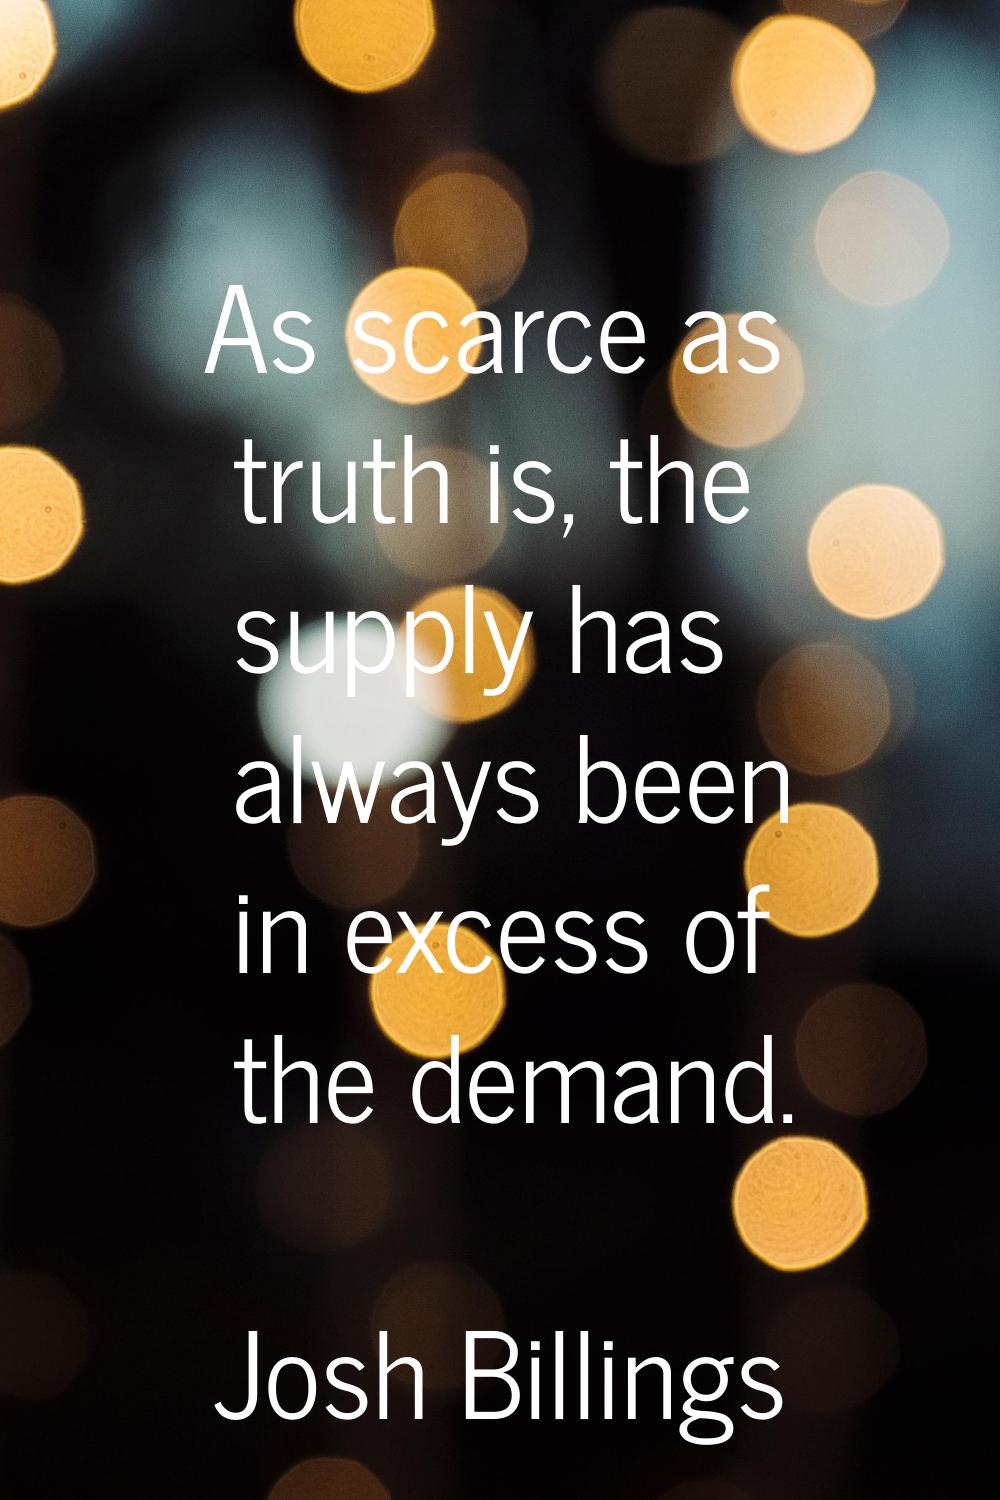 As scarce as truth is, the supply has always been in excess of the demand.